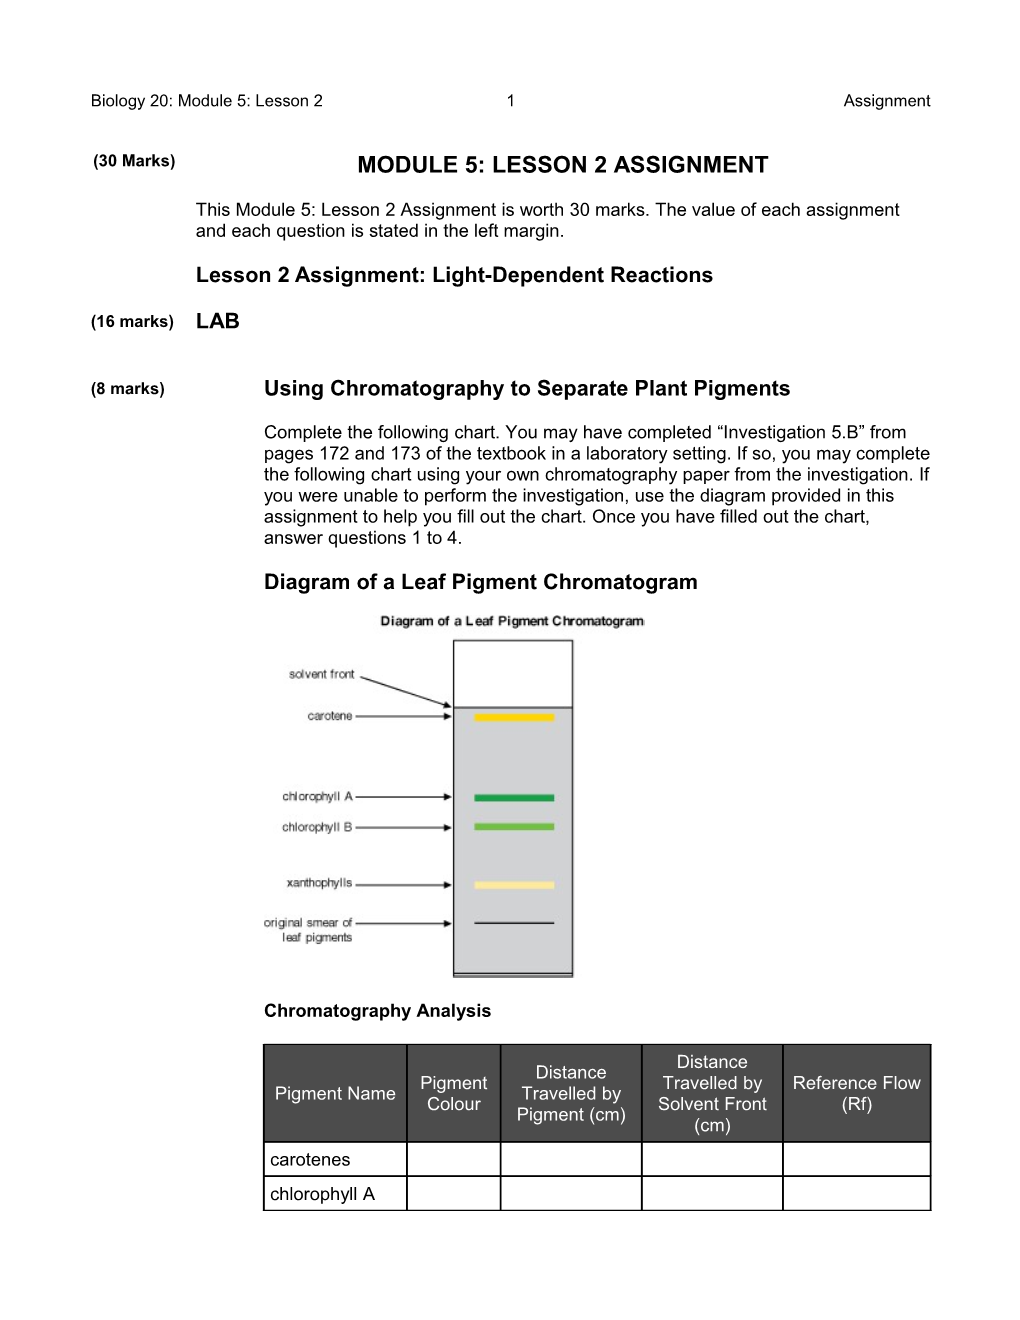 Lesson 2Assignment: Light-Dependent Reactions